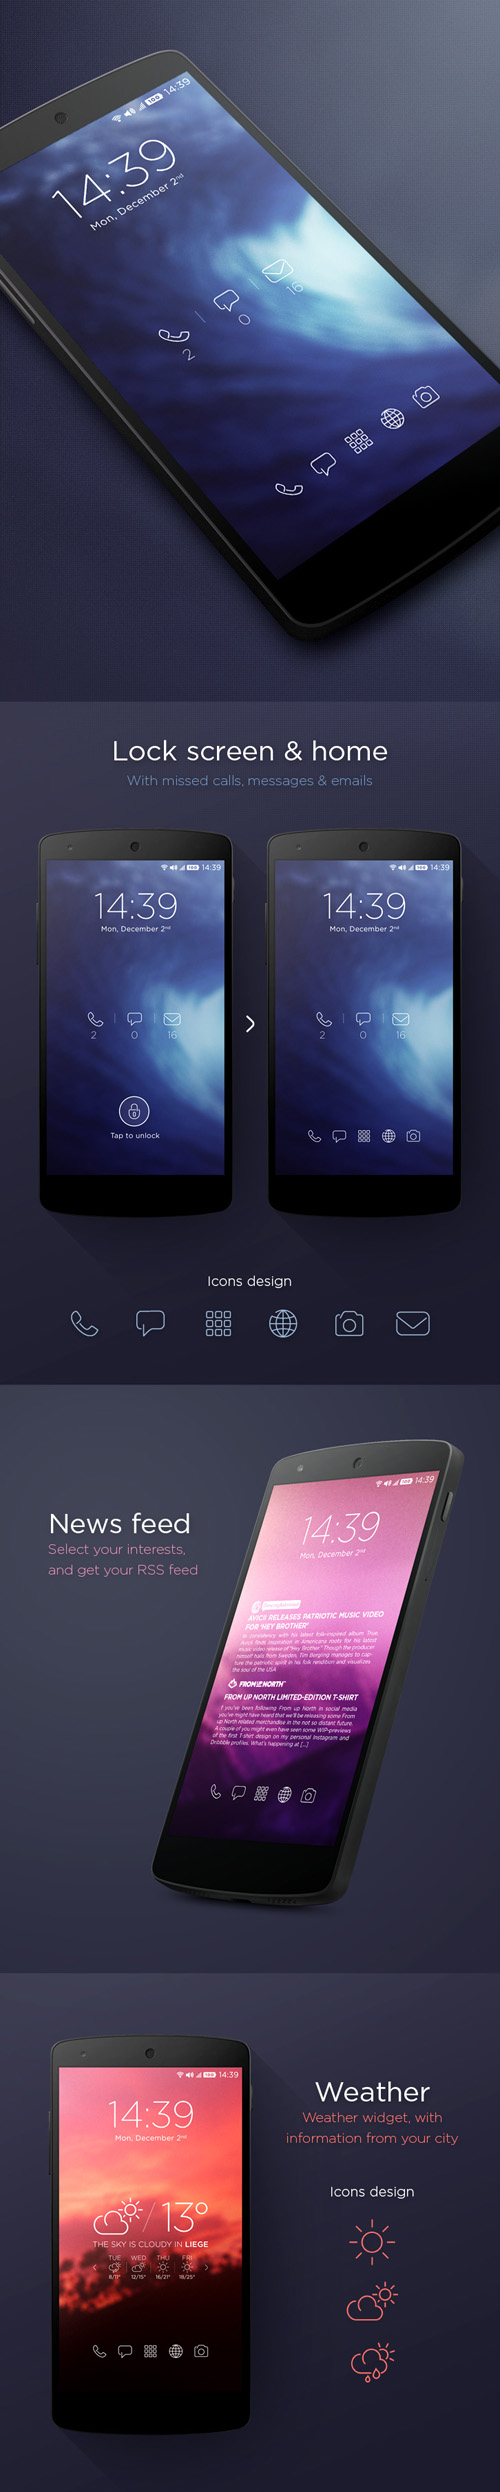 Purity Theme UI Designs and Concepts for Inspiration